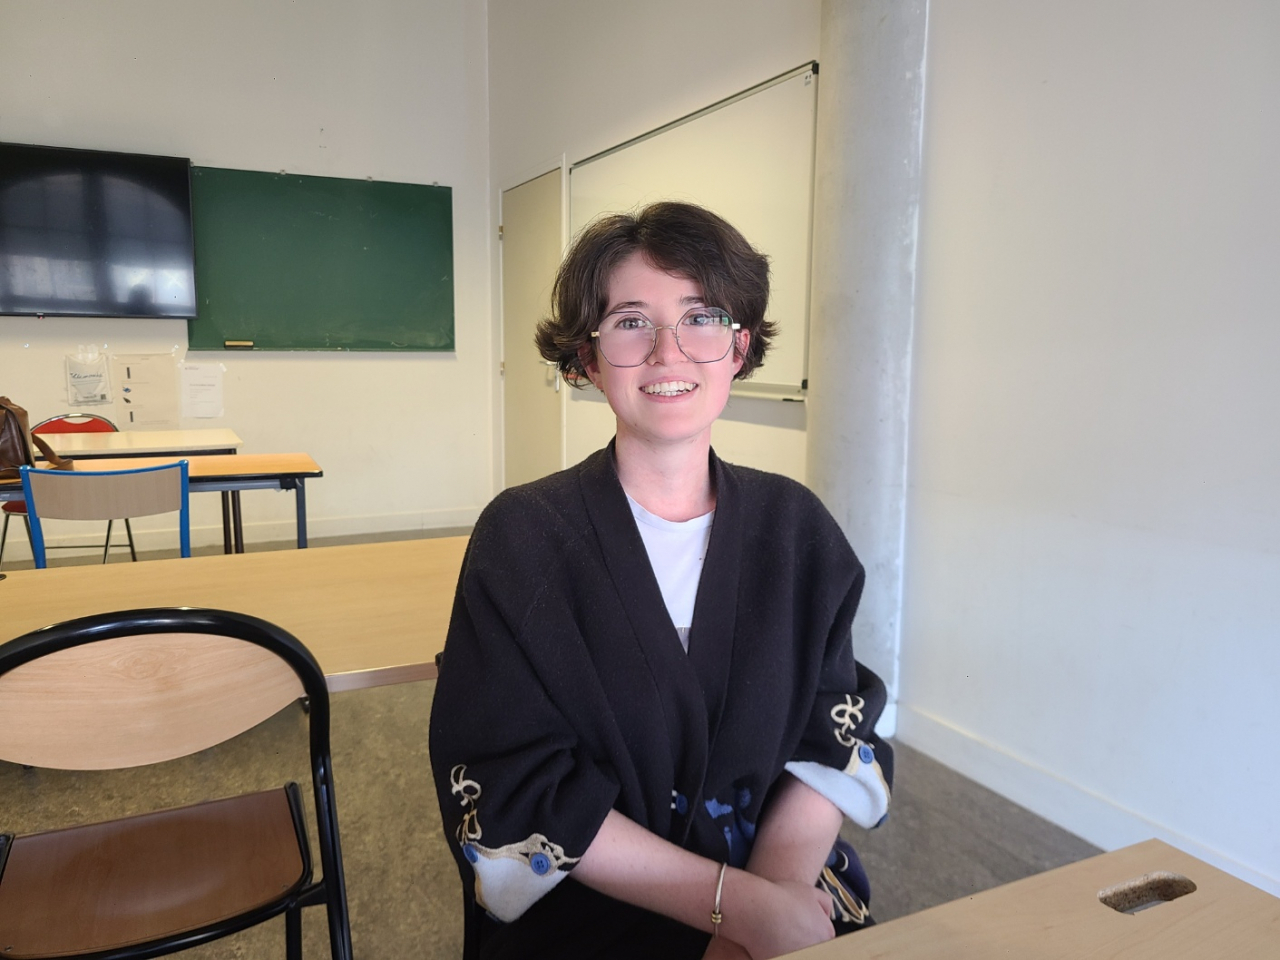 Mathilde, a Korean studies major at Paris Cite University, poses for a photo during an interview at the university on Sept. 25. (Jung Min-kyung/The Korea Herald)